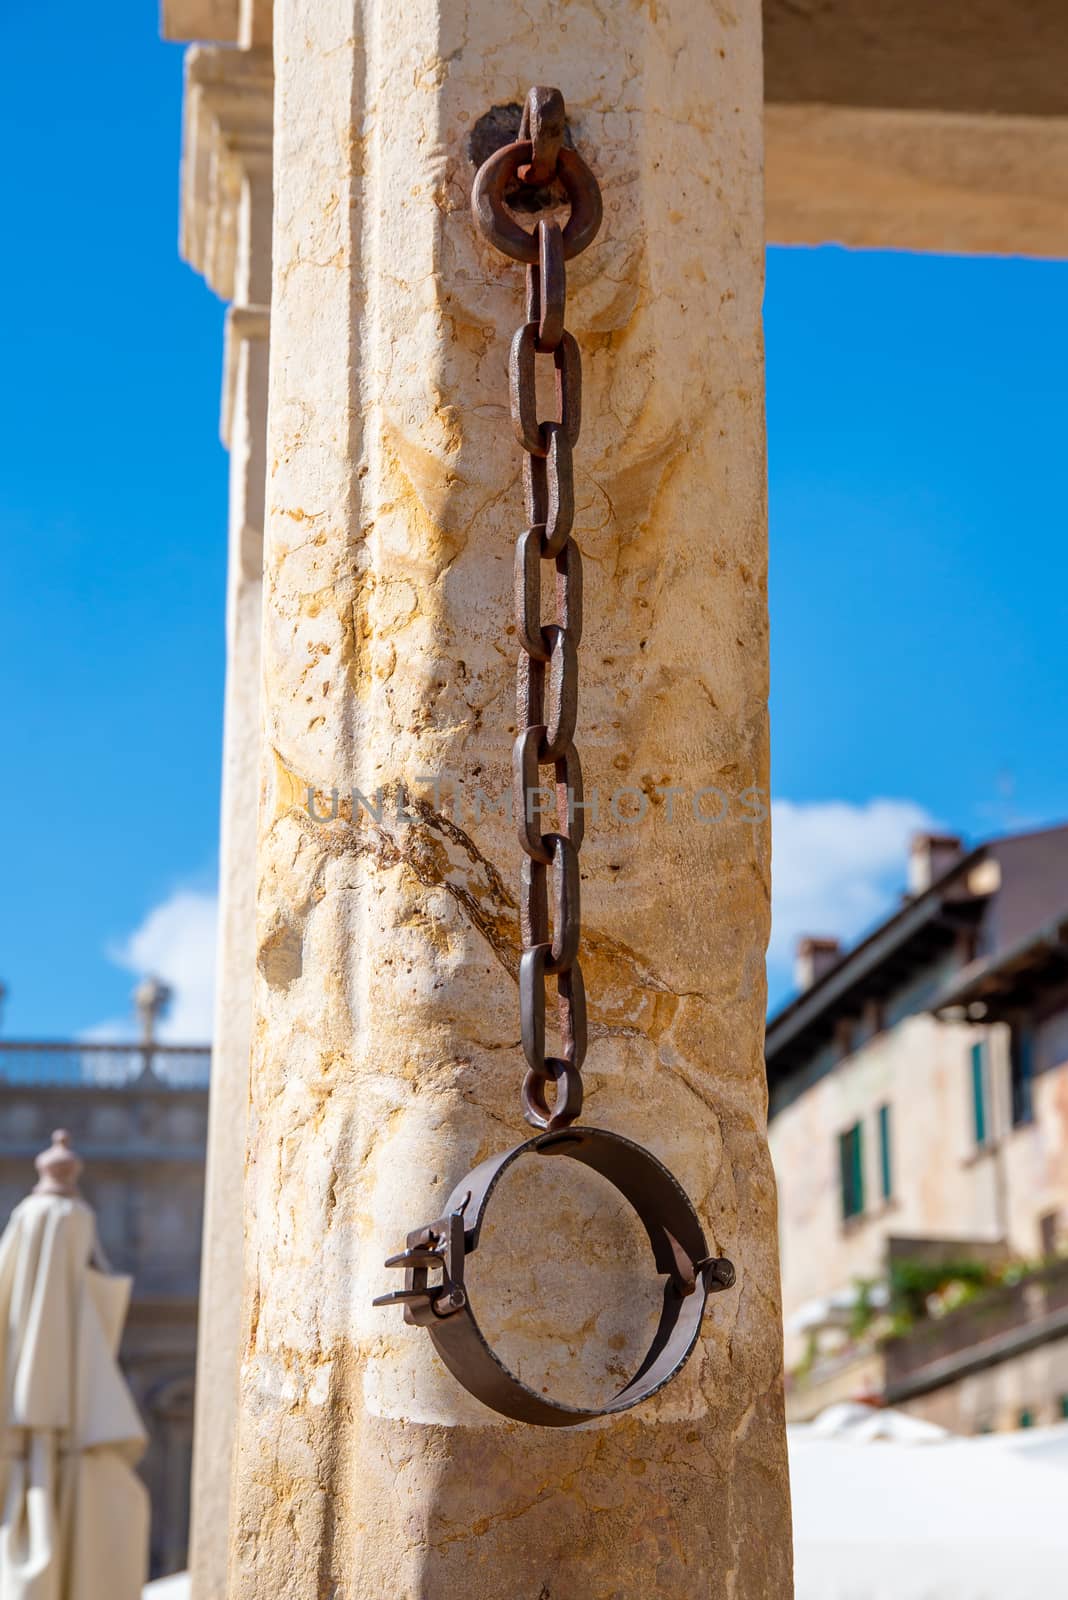 A metal neck iron on a pillory made of stone, which hangs down from a chain and where in former times prisoners were chained, who were put on the pillory